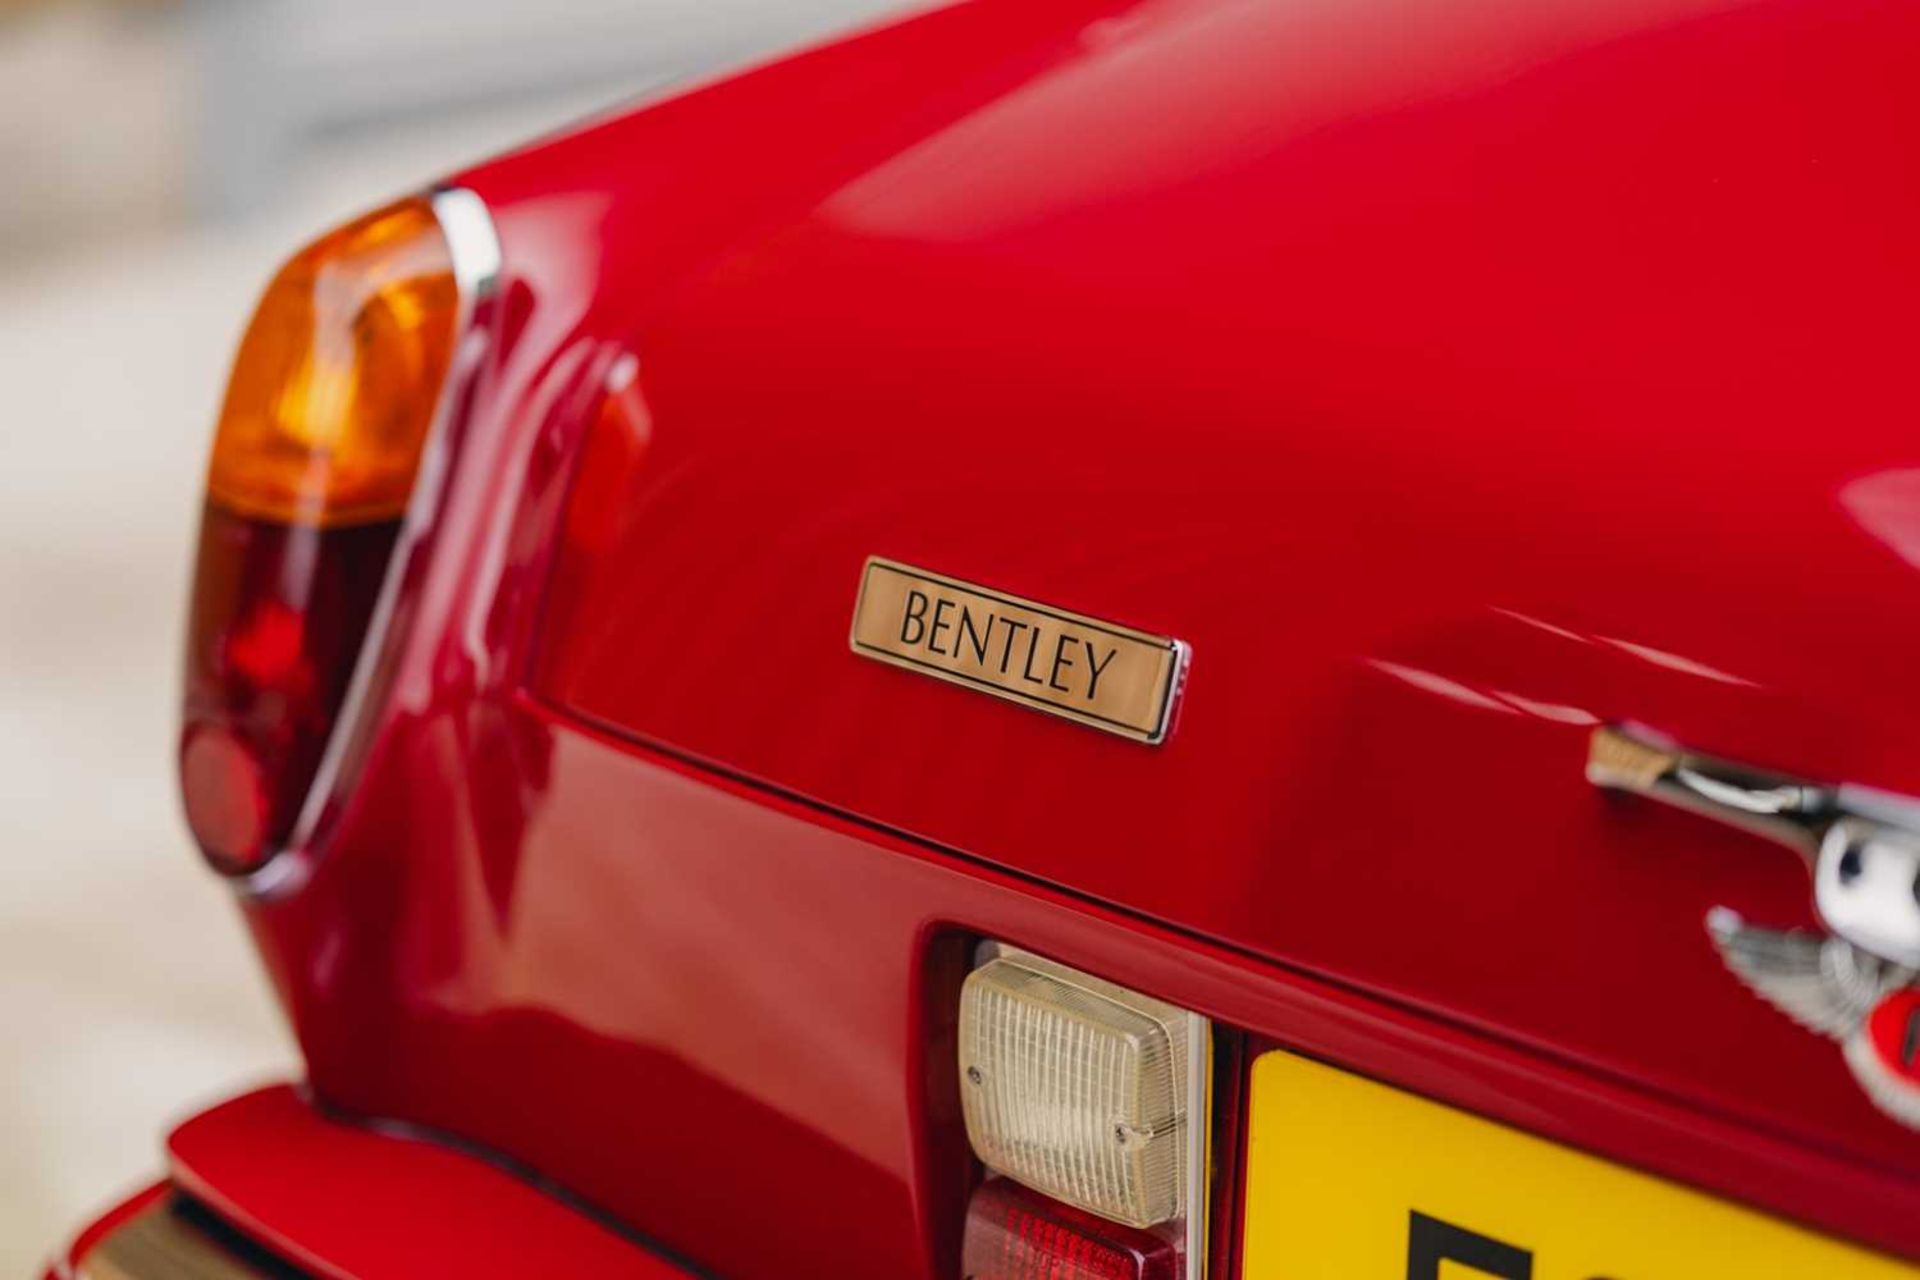 1989 Bentley Continental Convertible Meticulously maintained and boasts desirable factory options su - Image 34 of 71